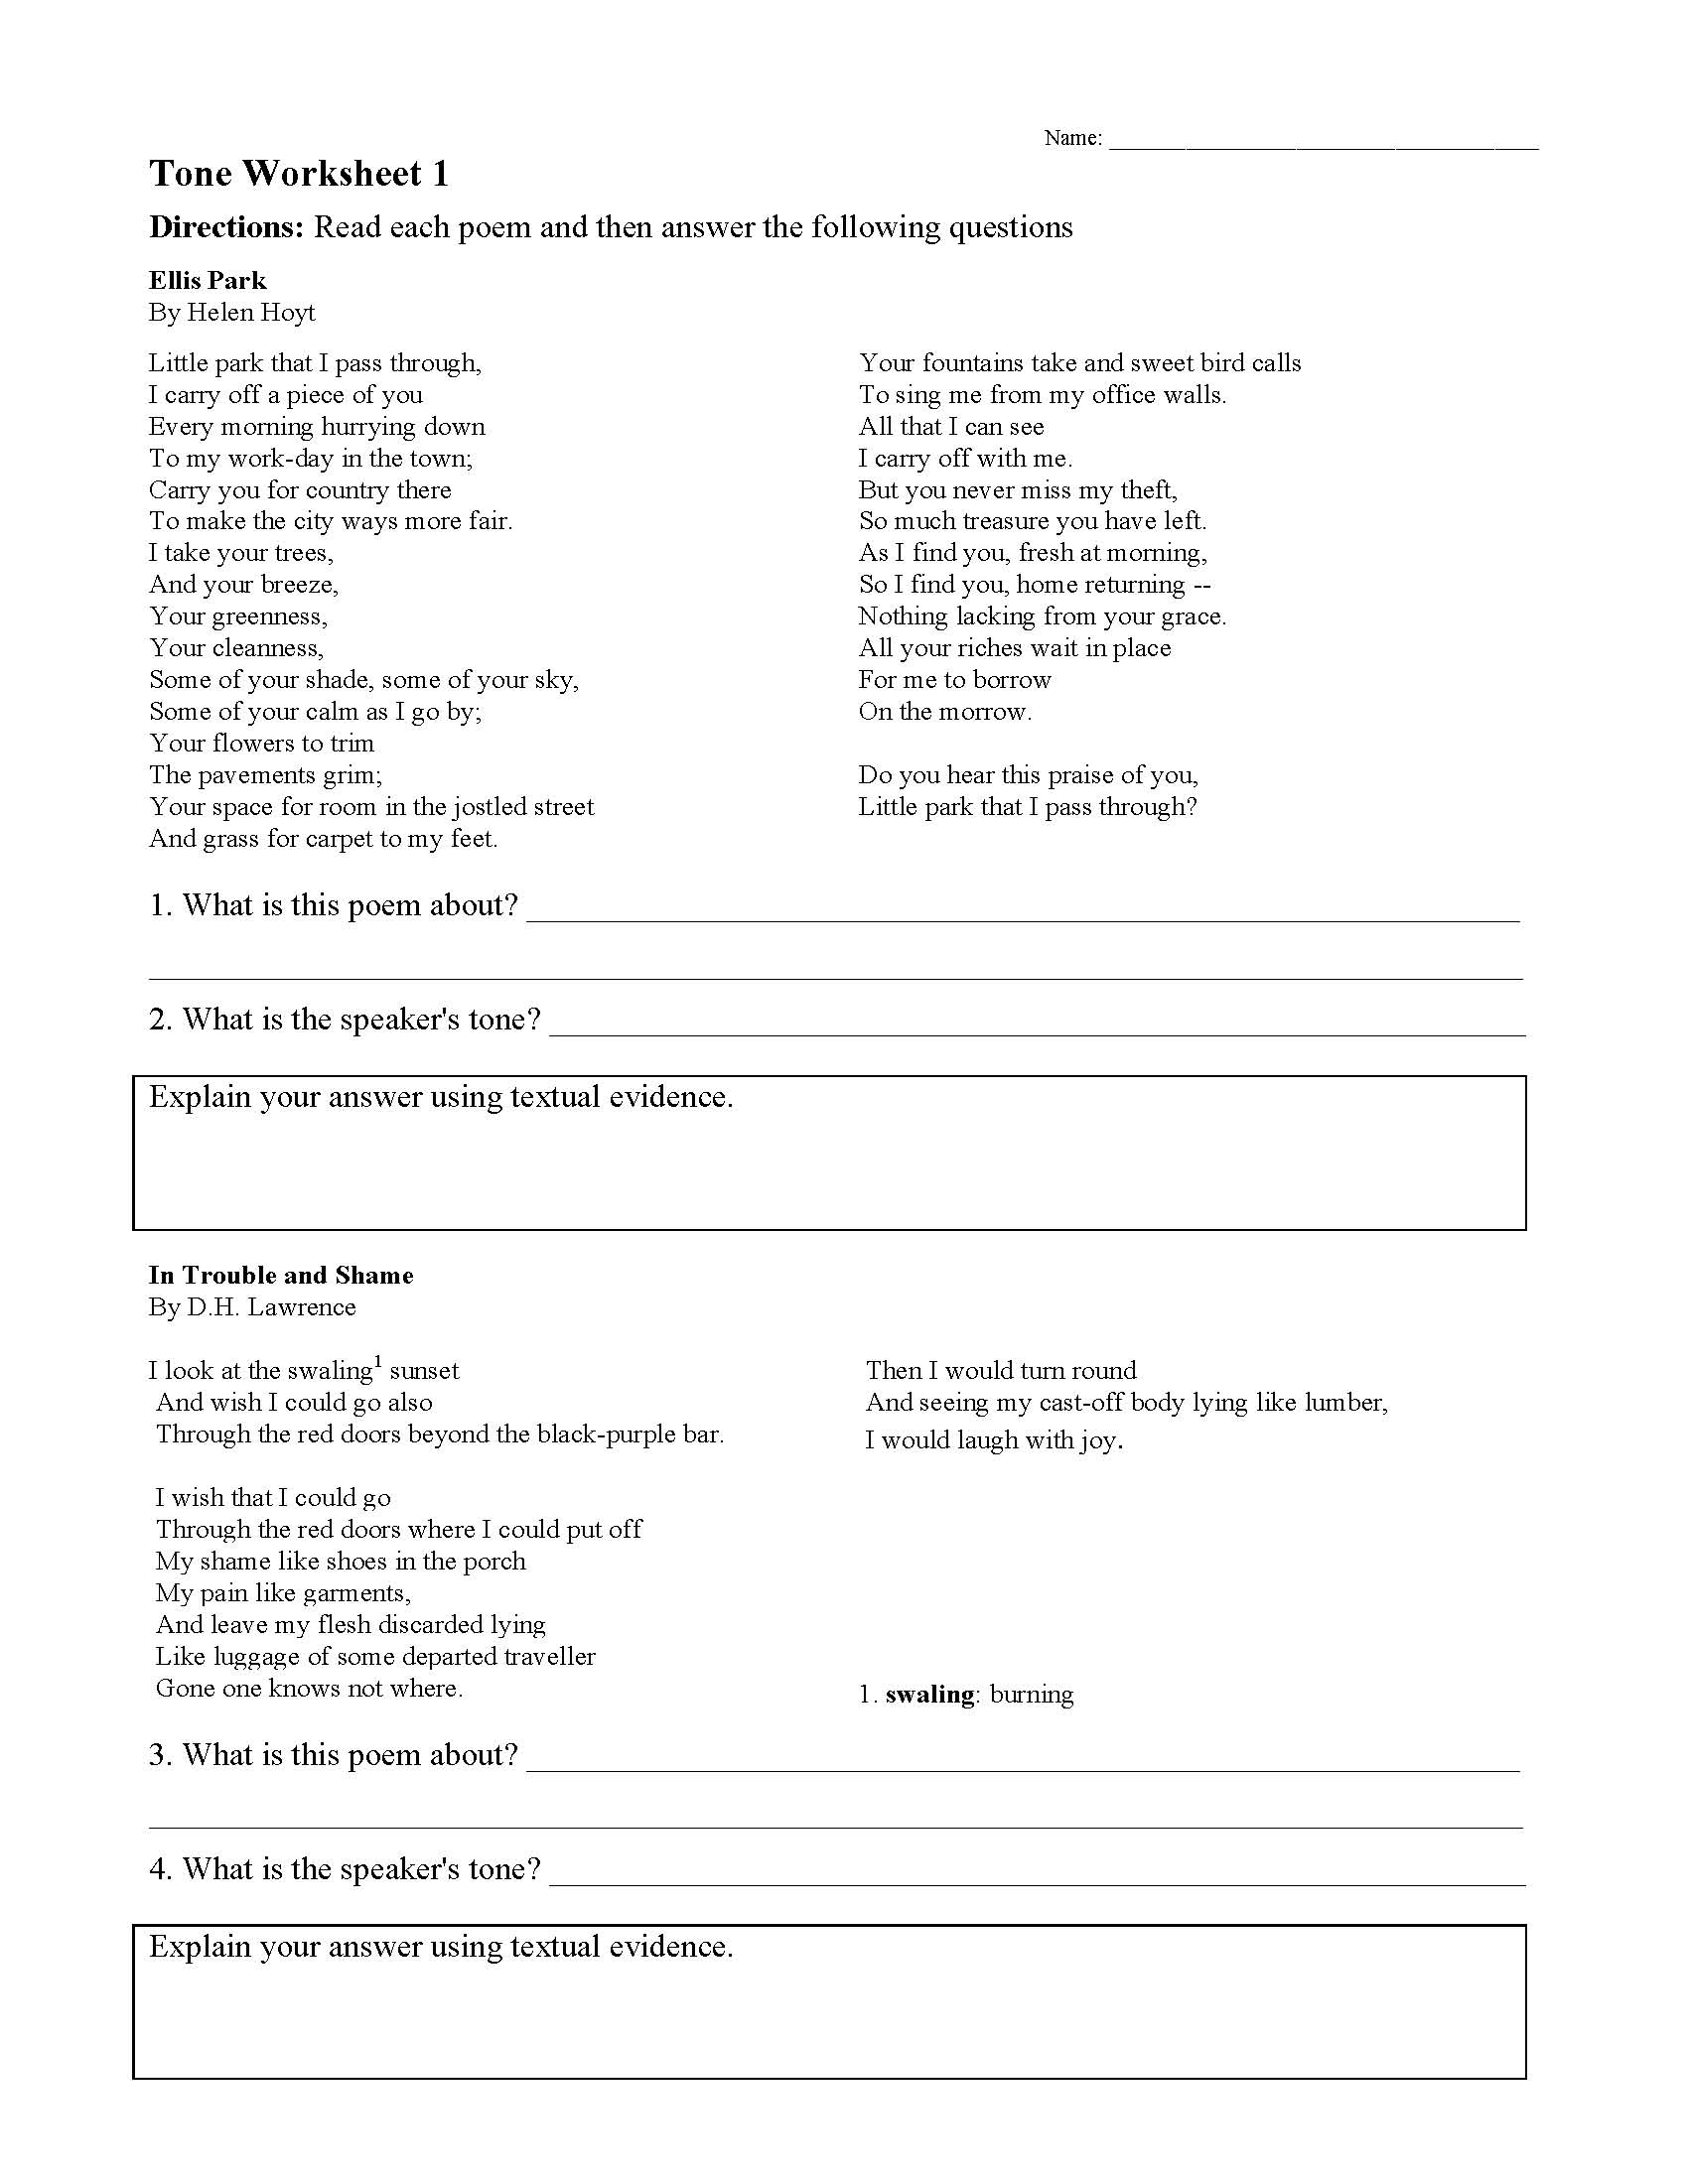 This is a preview image of Tone Worksheet 1. Click on it to enlarge it or view the source file.